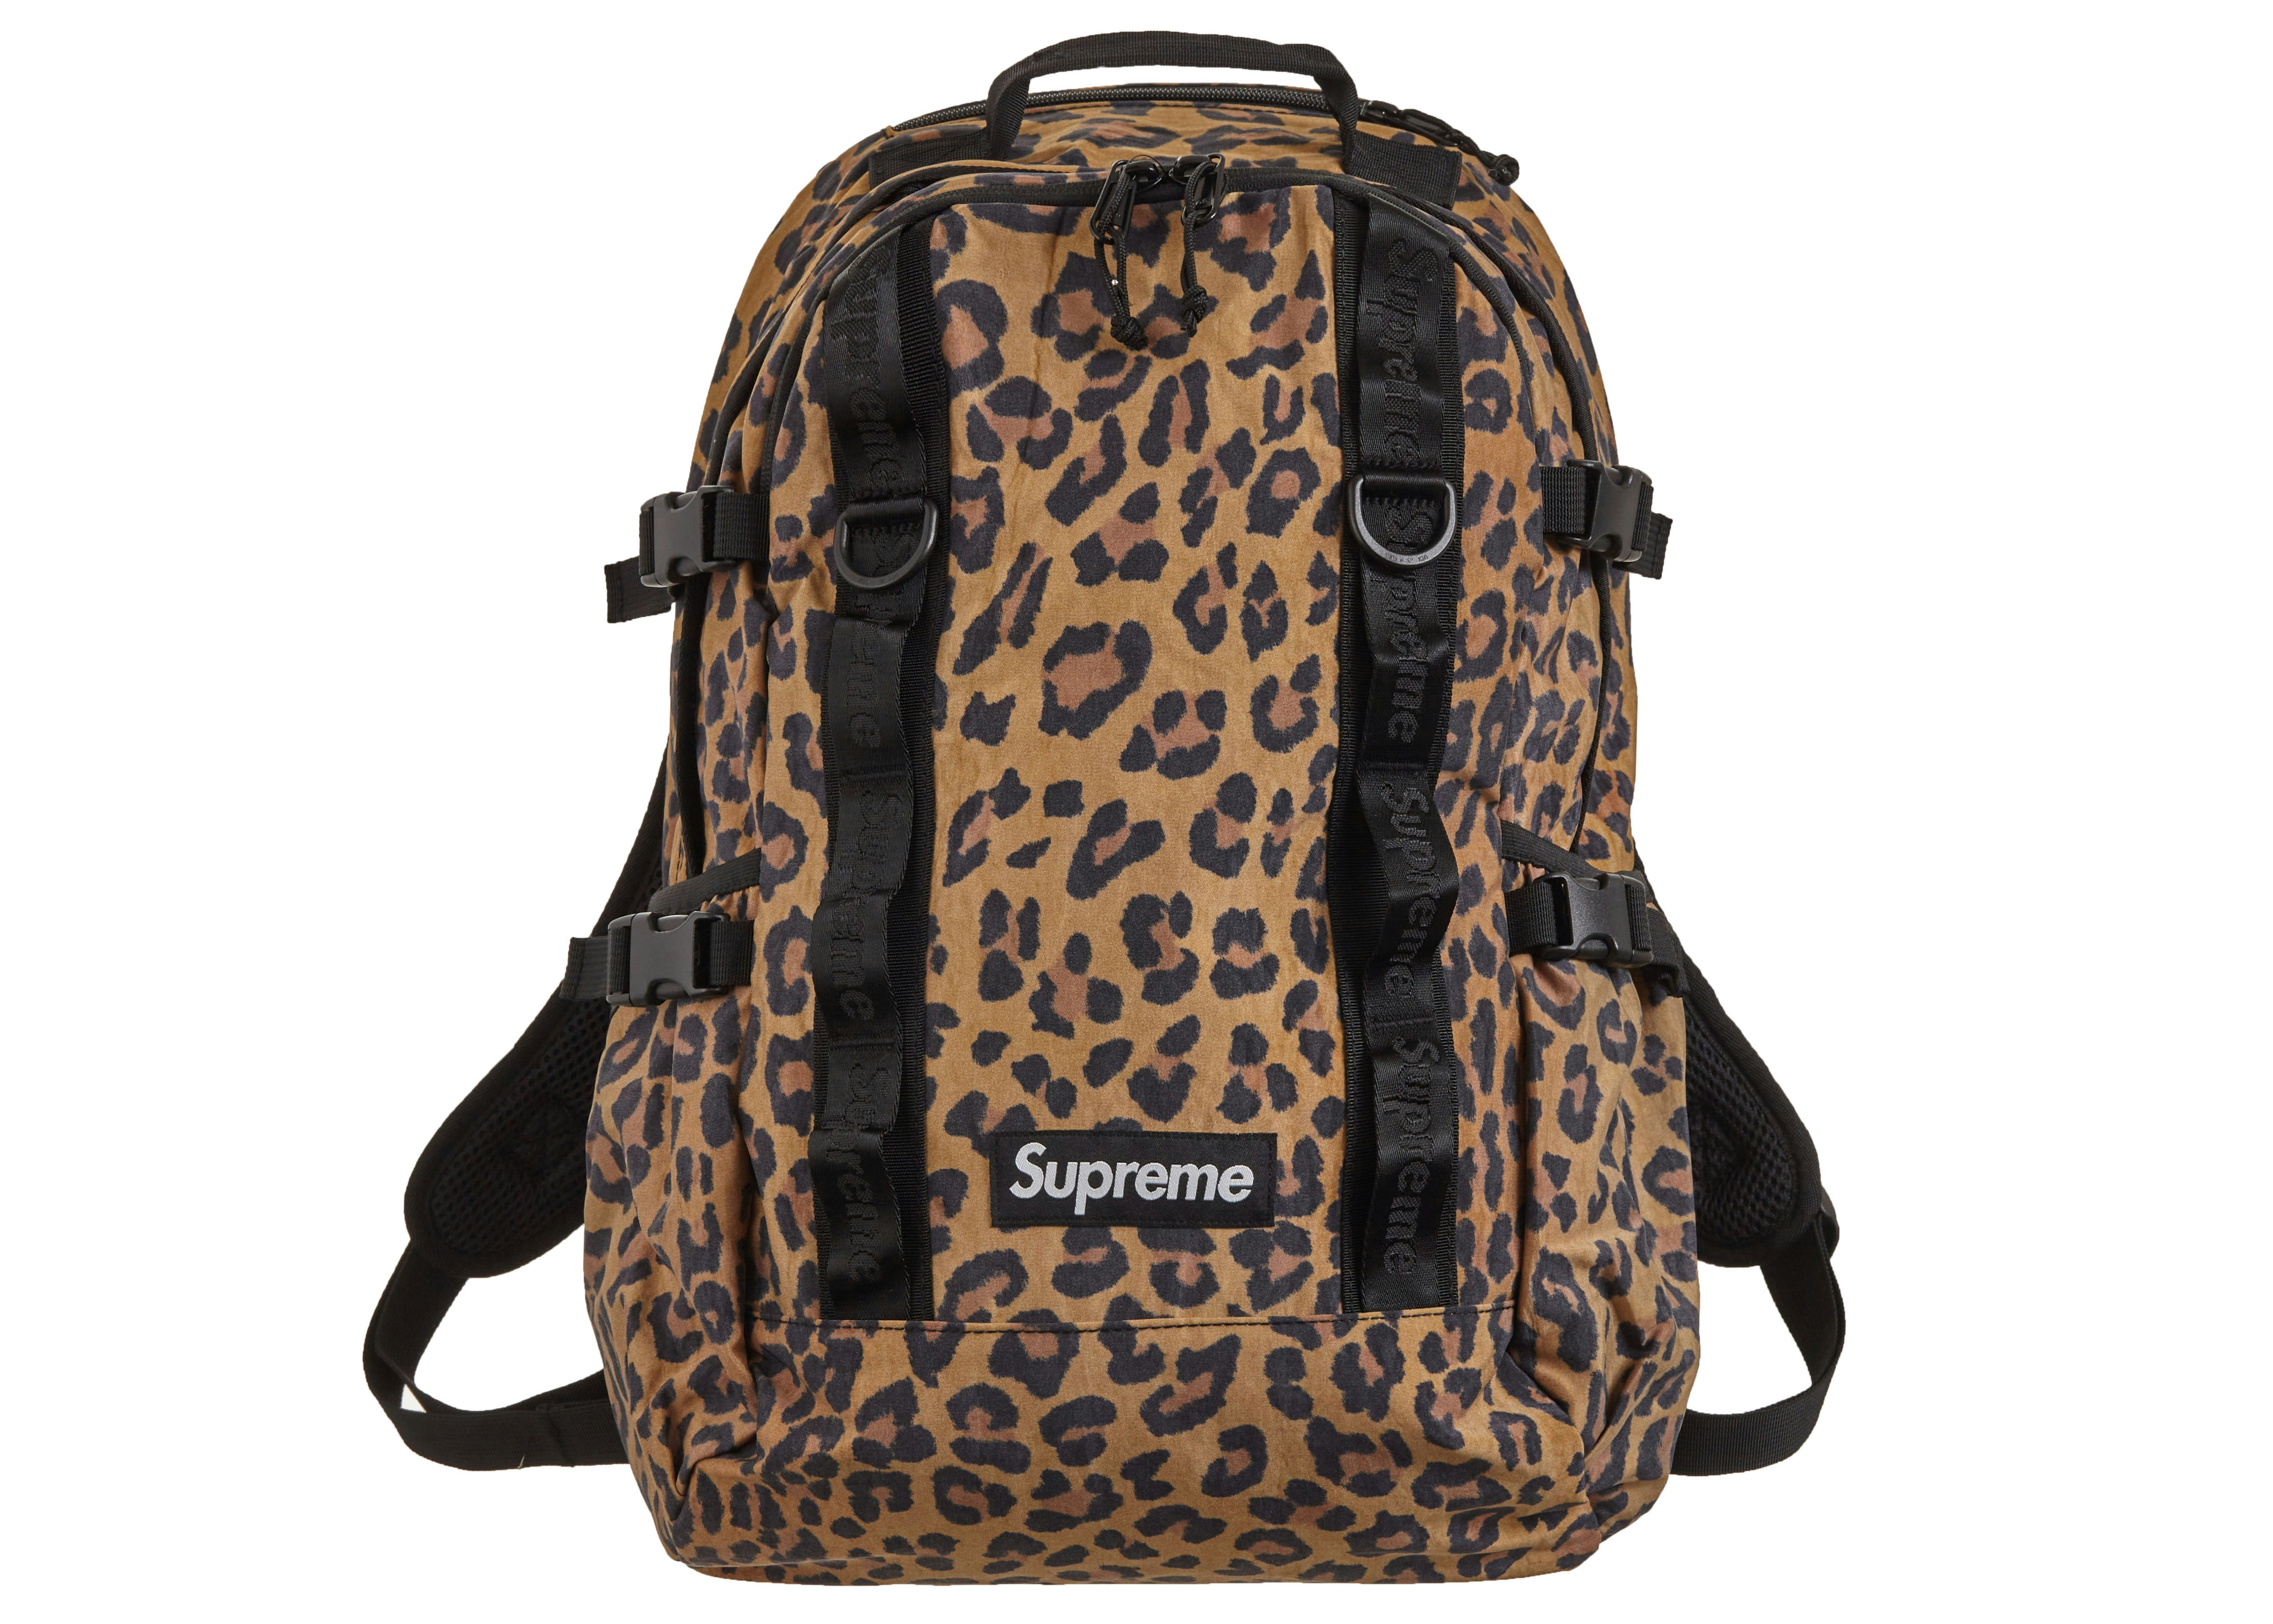 Leopard Backpack Purse | The Store Bags